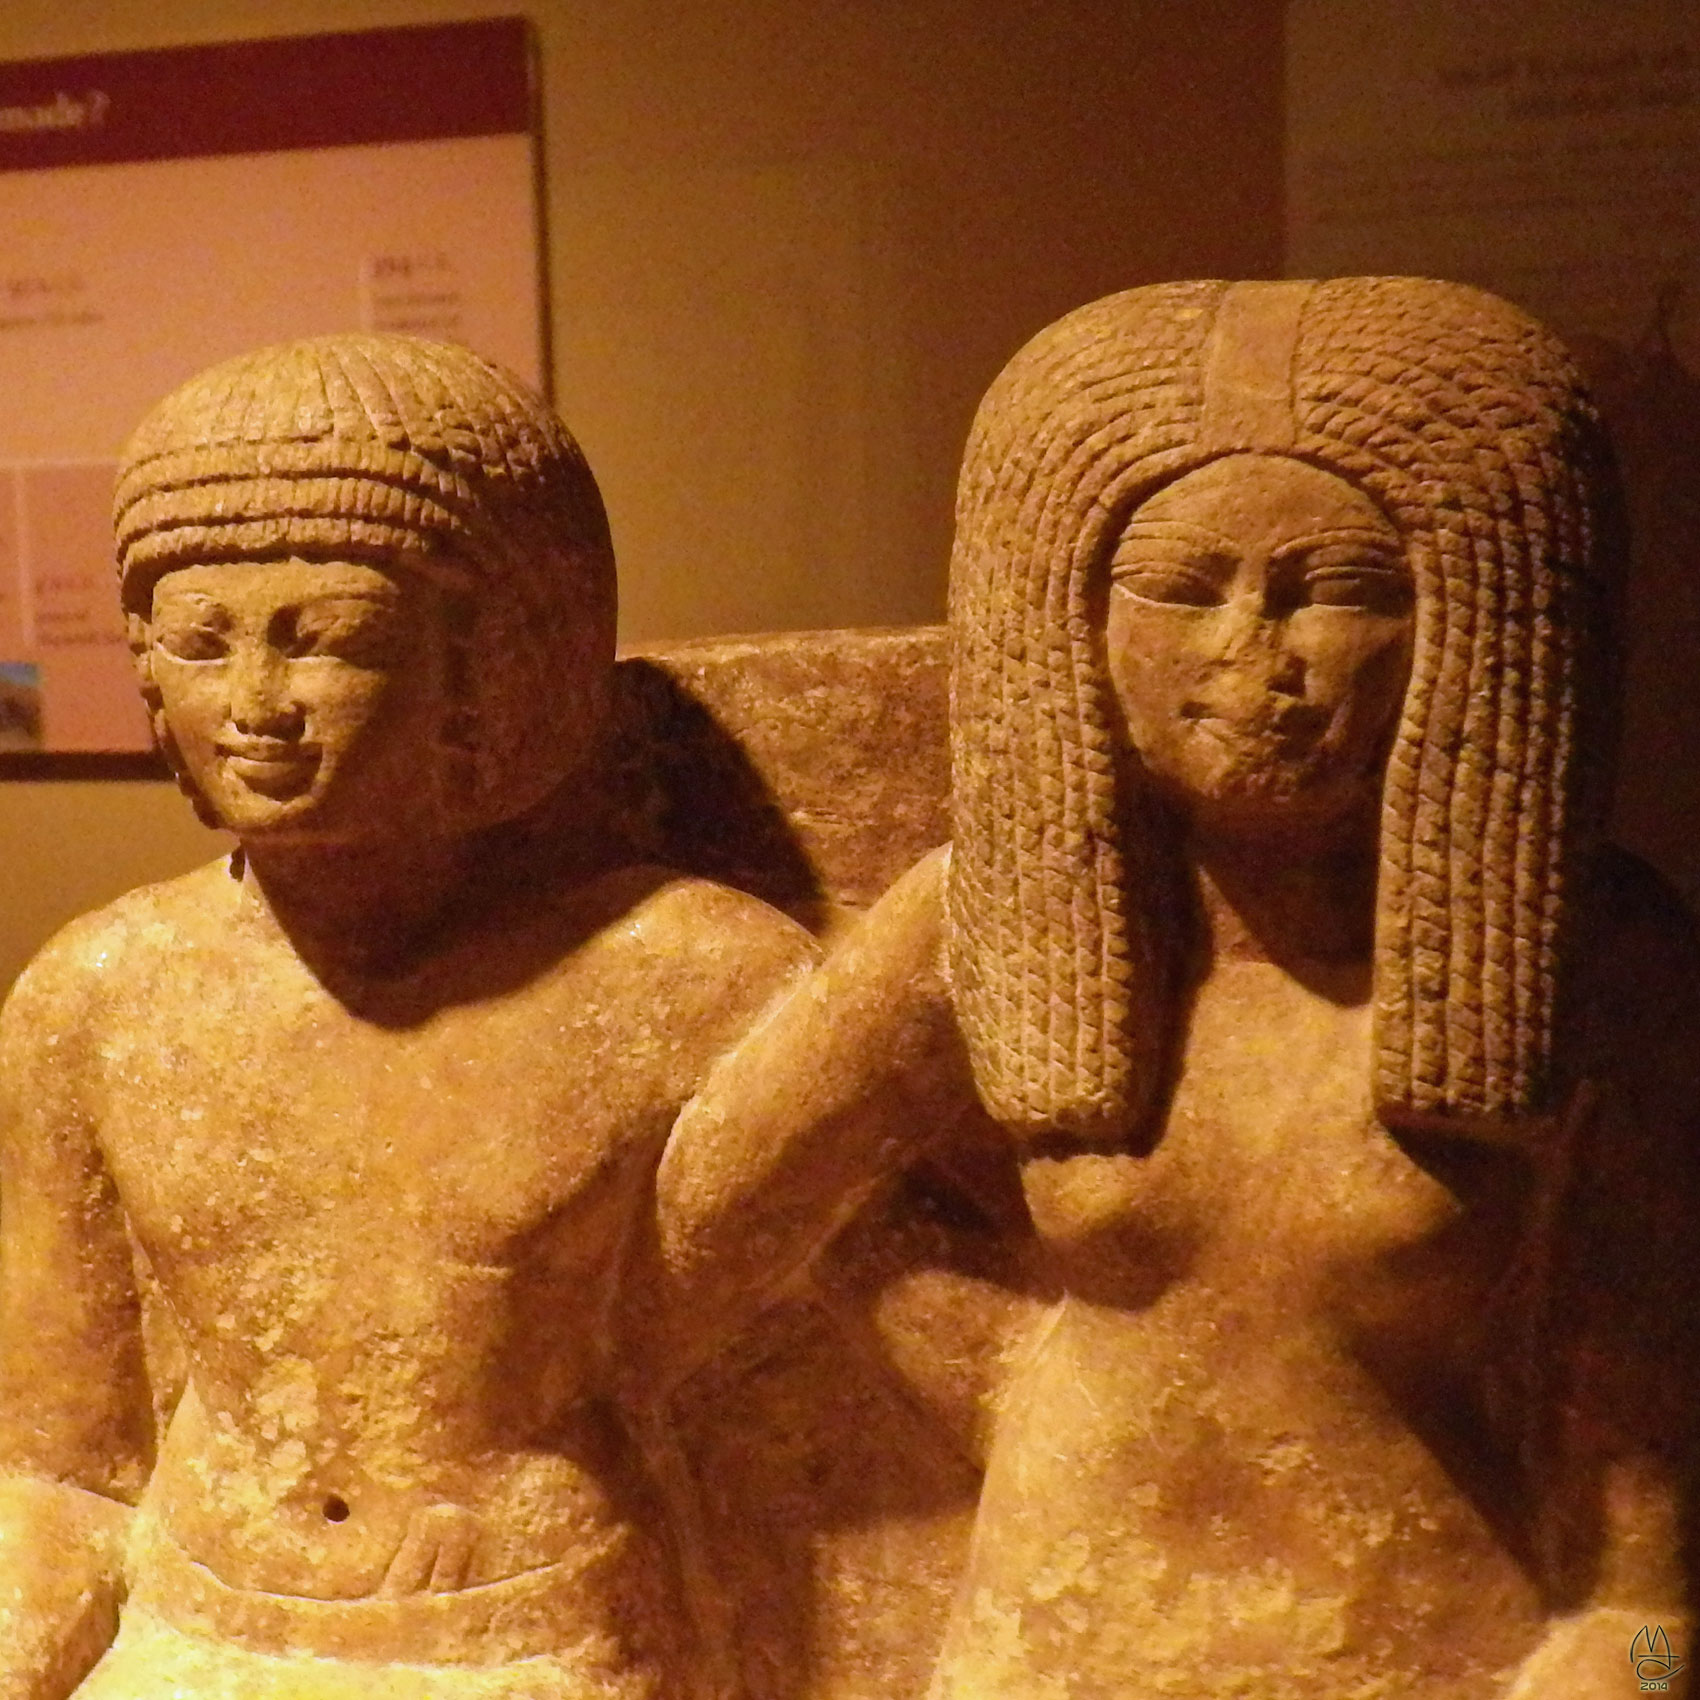 Pair Statue of Mery and Wife Seti 1390-1350 BCE